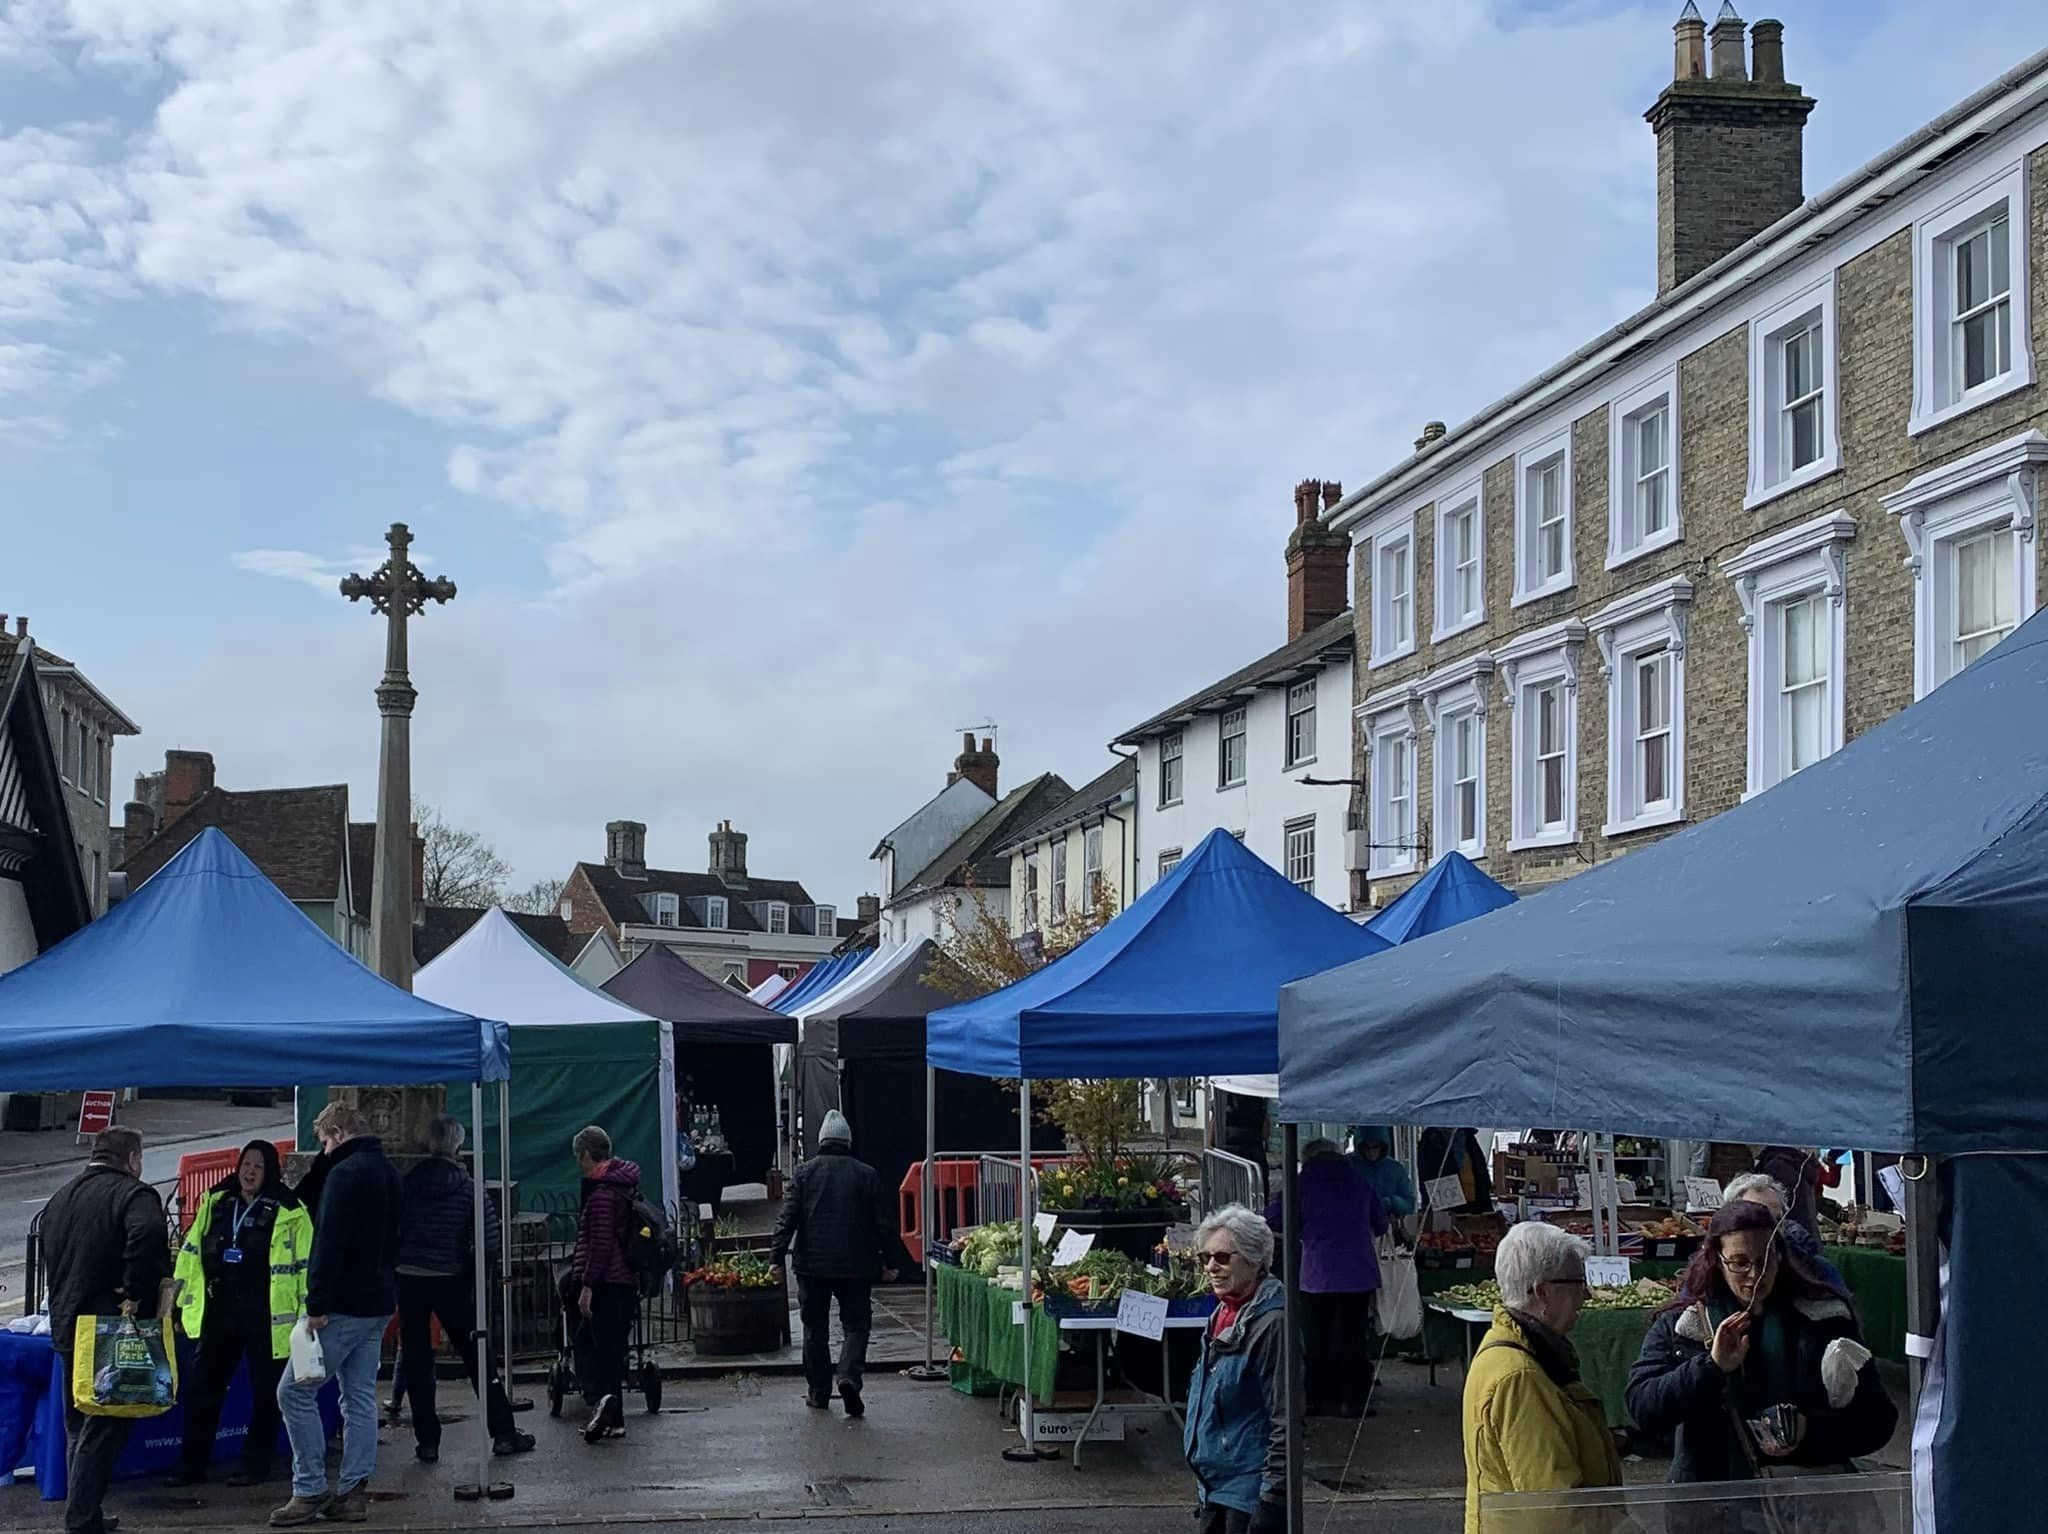 Image of Clare Market stalls